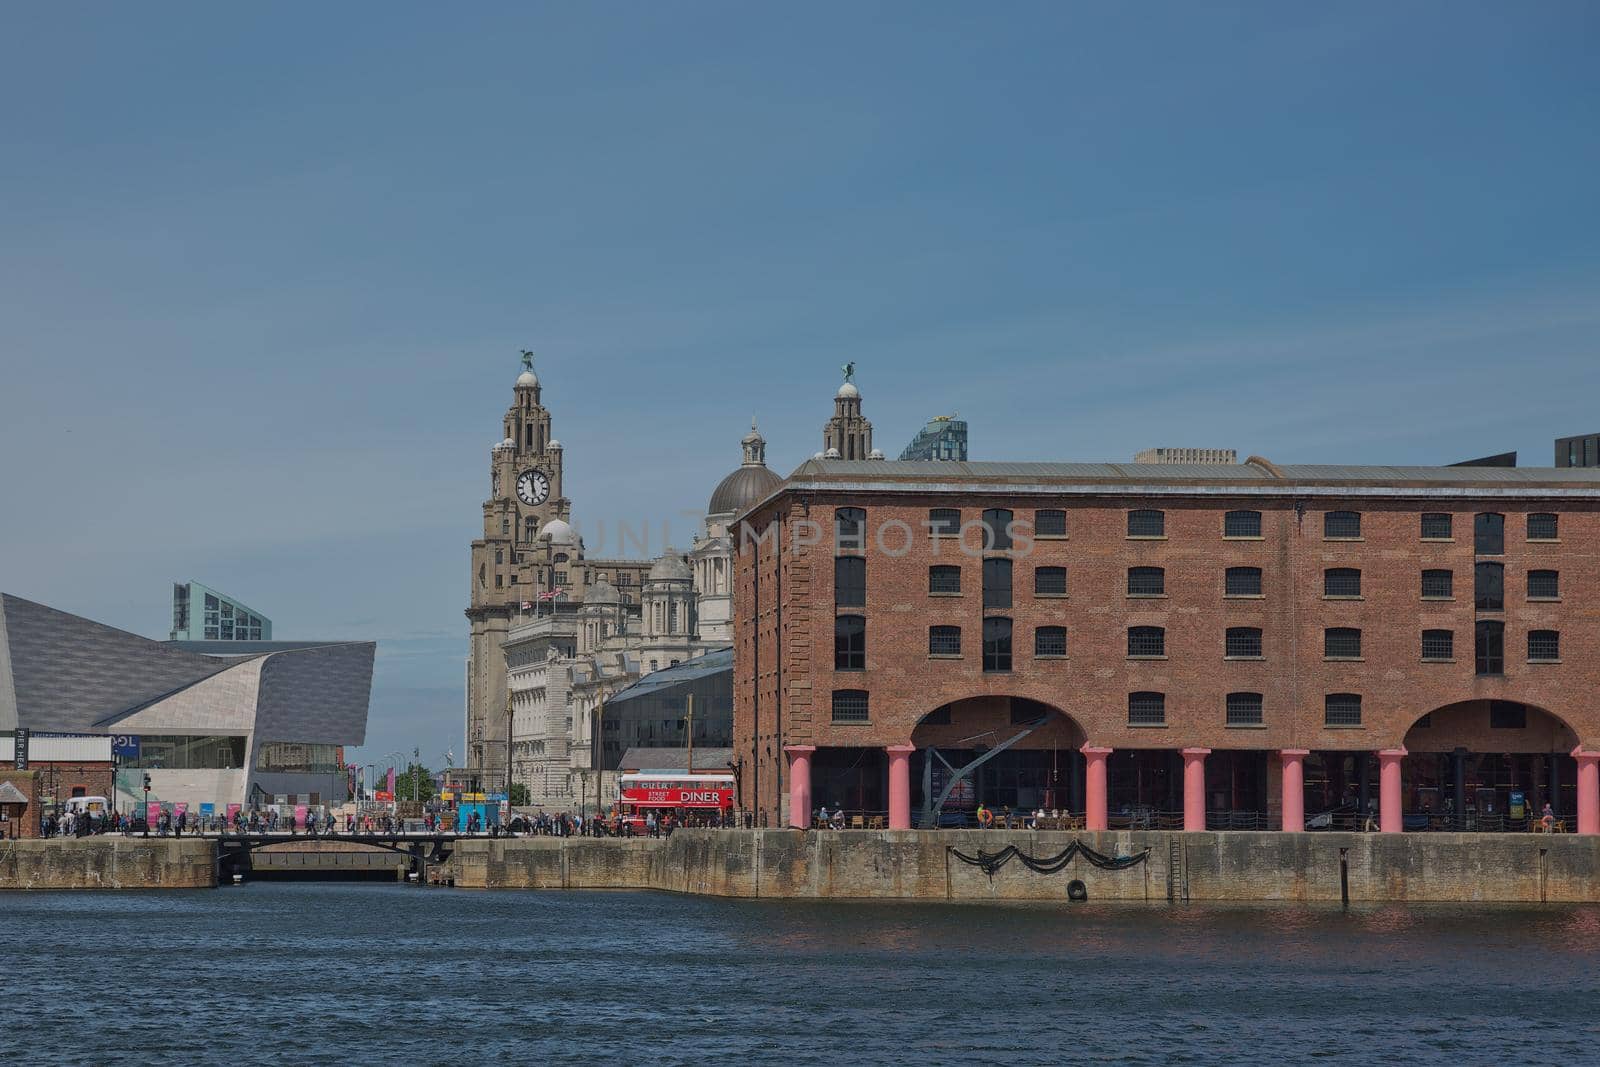 View of Albert Dock in Liverpool, England. The Albert Dock is a complex of dock buildings and warehouses. by wondry